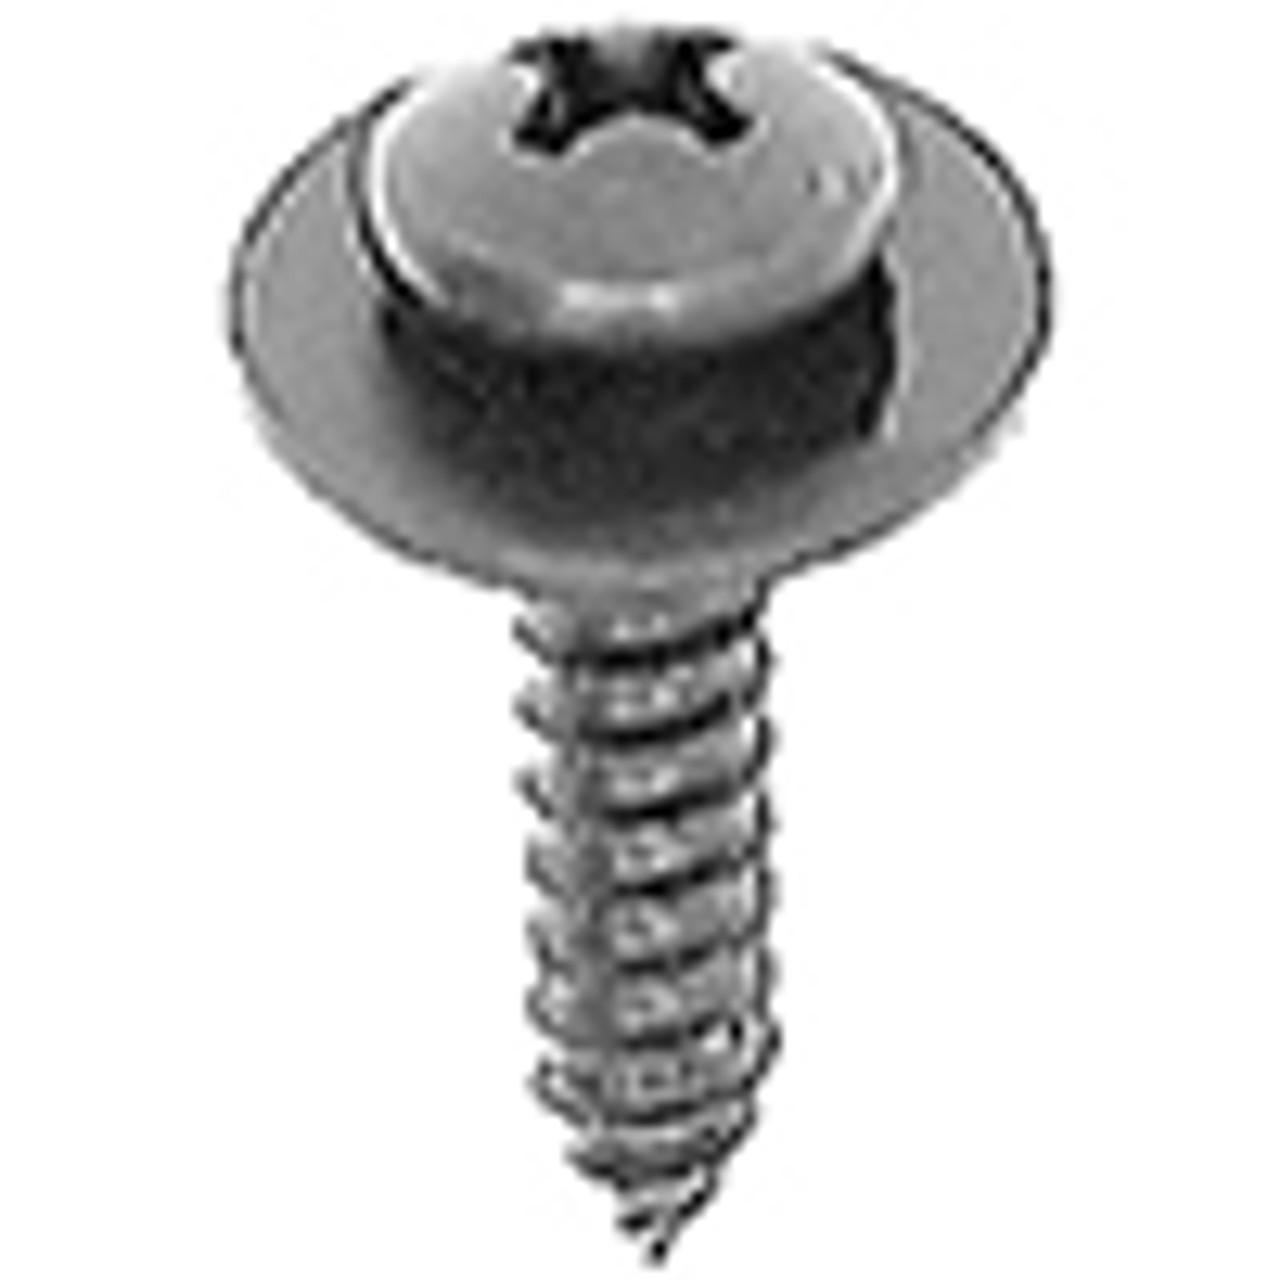 M4.2-1.41x20mm
Outer Diameter: 16mm
Black Phosphate
50 Per Box
Click Next Image For Screw Detail